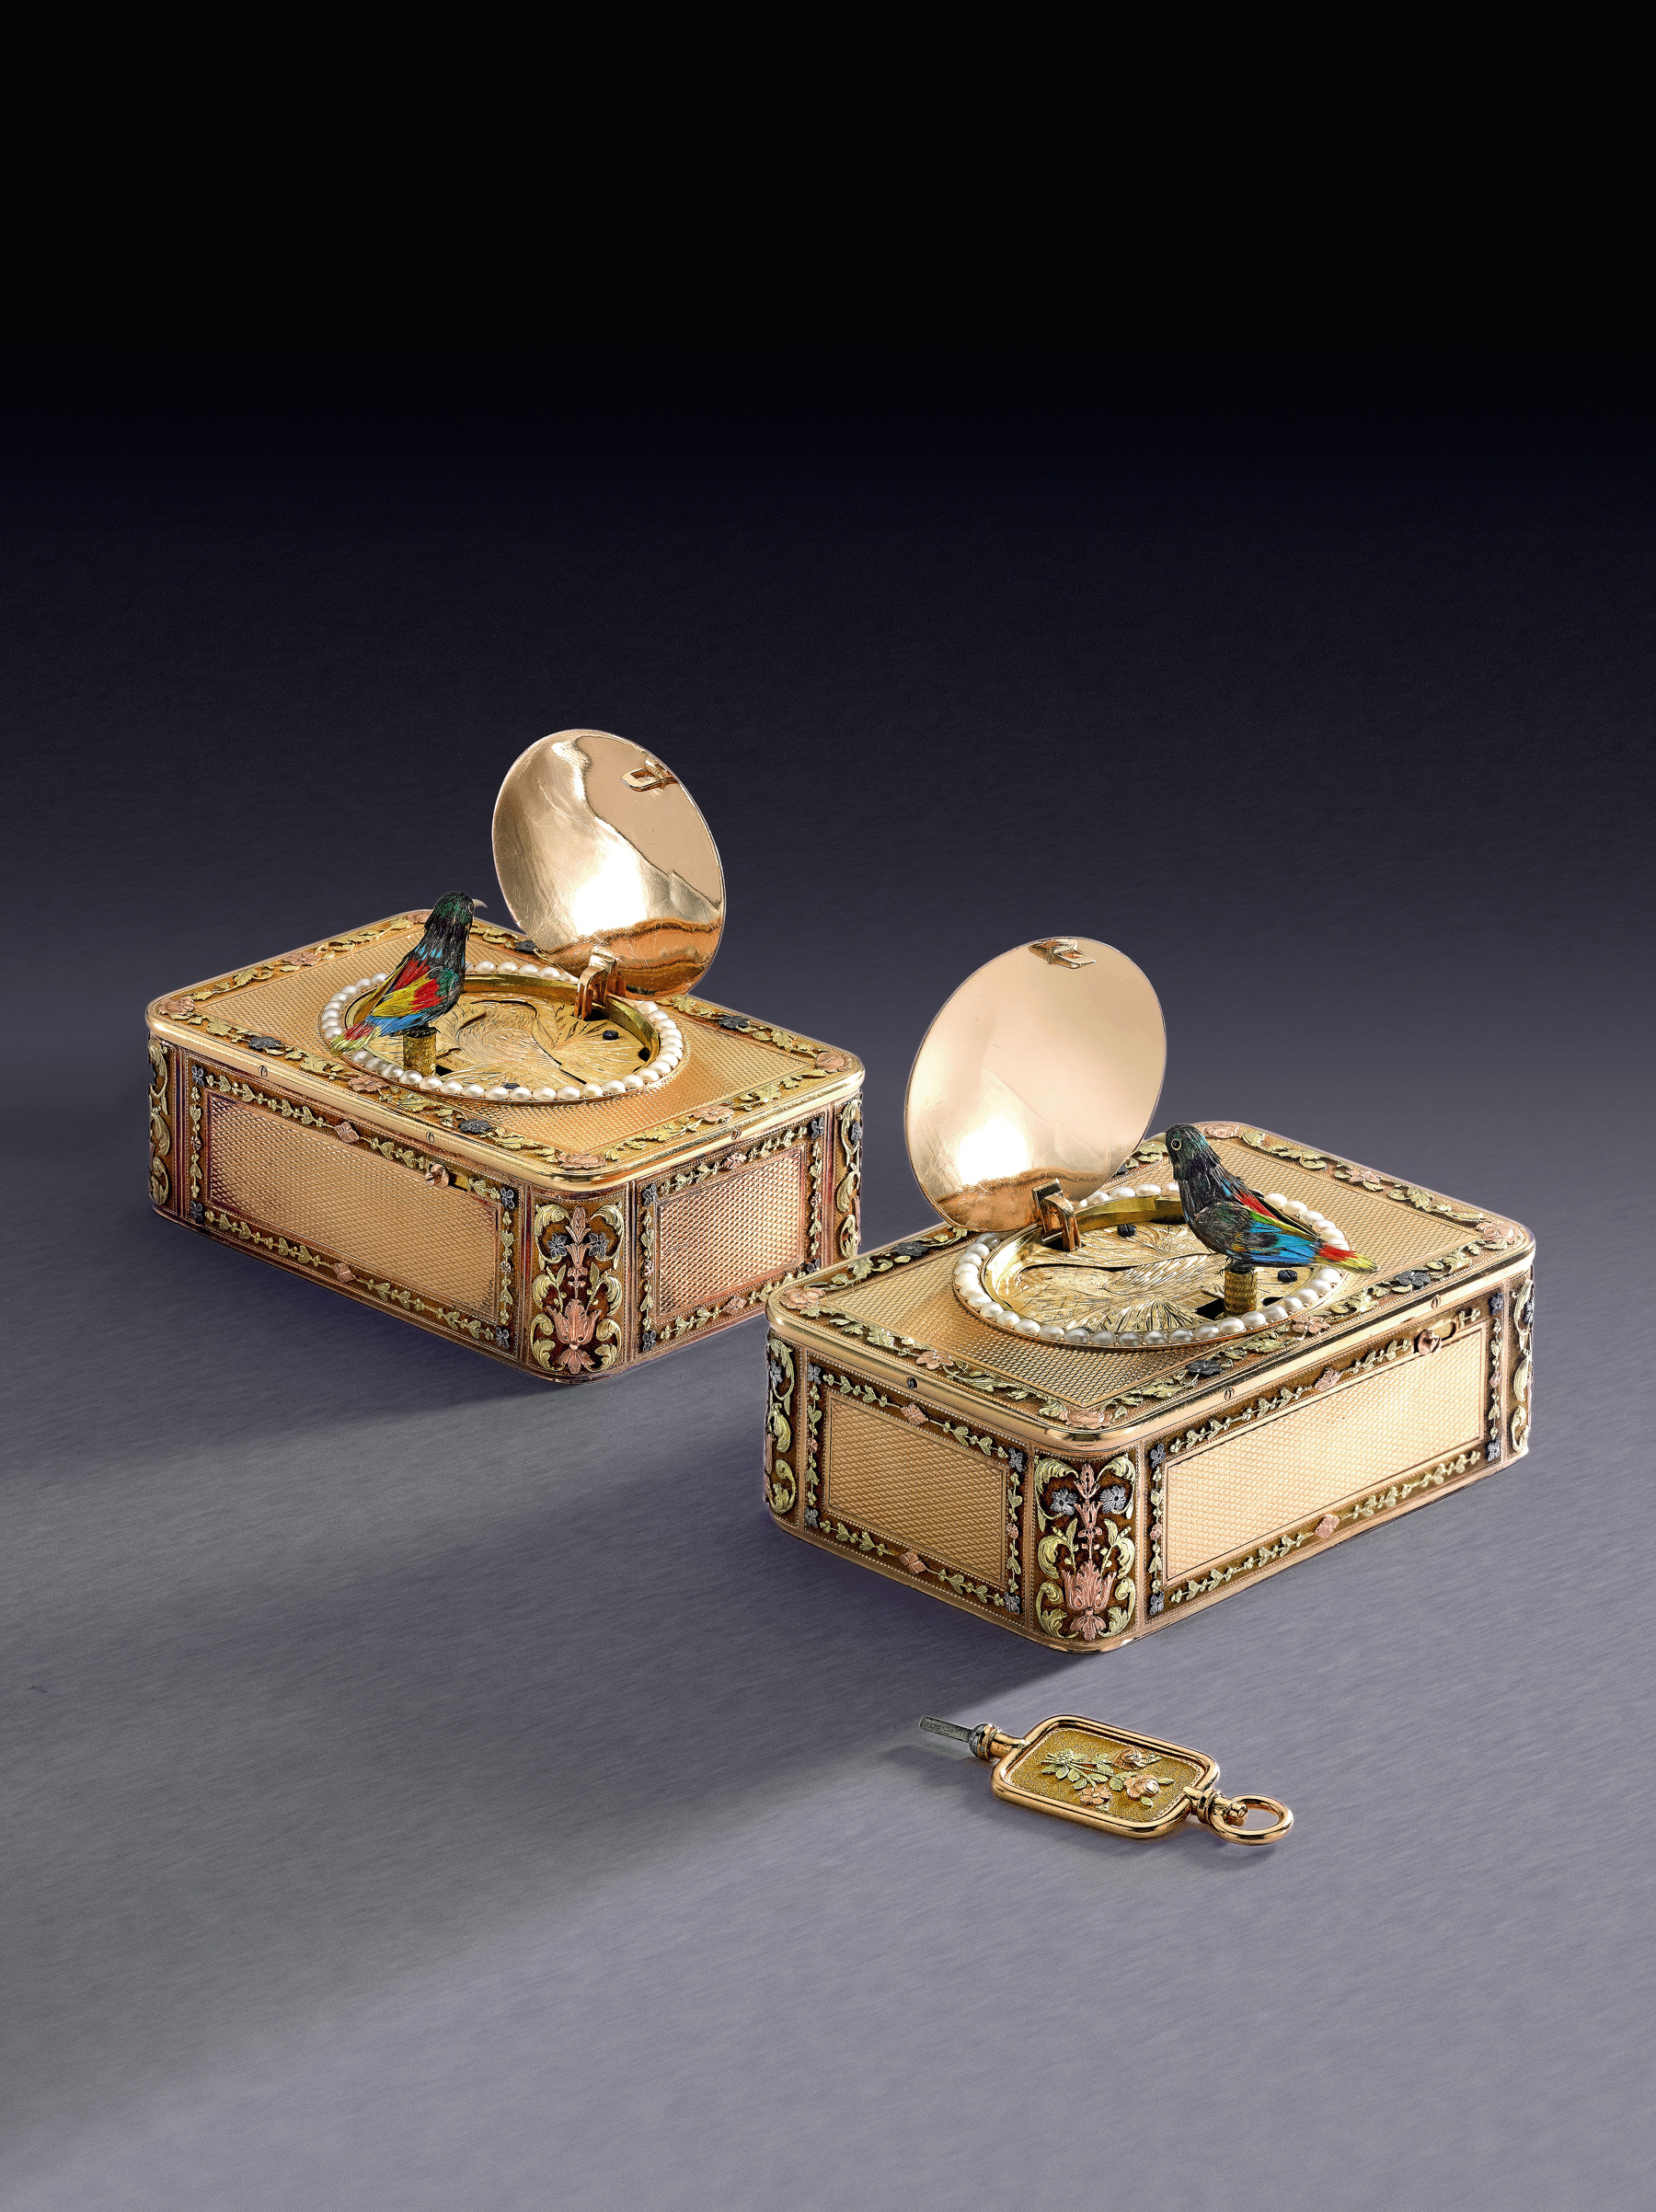 An Impressive And Rare Consecutively Numbered Pair Of Four-Color Gold And Pearl Singing Bird Snuff Boxes For The Chinese Market Circa 1820